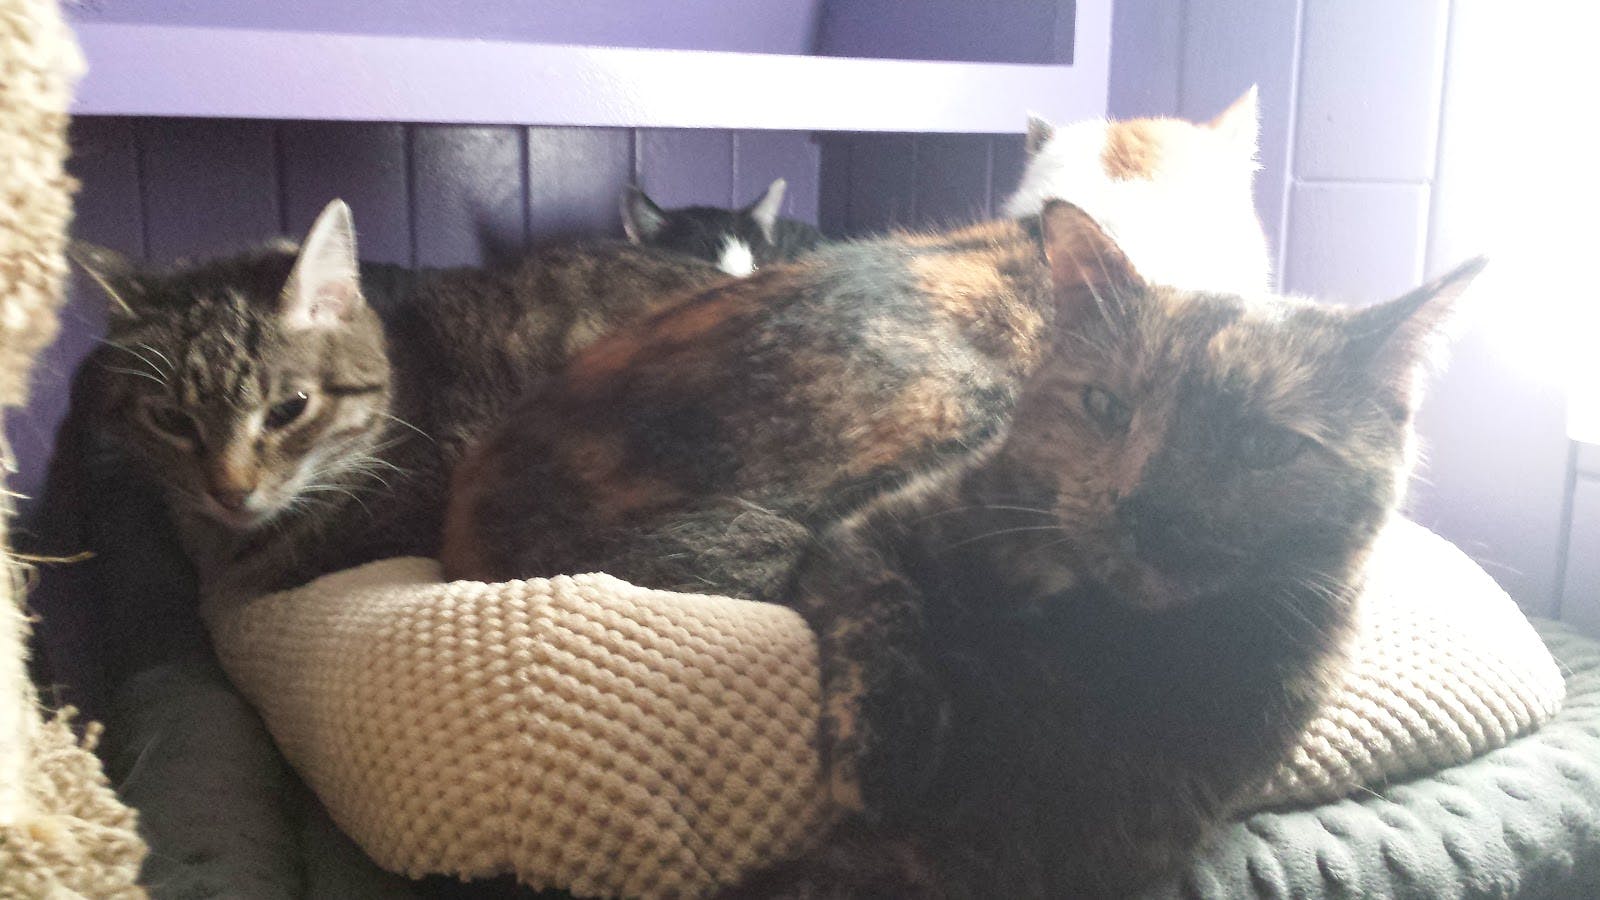 Kitty pile with my beloved Sookie at the helm